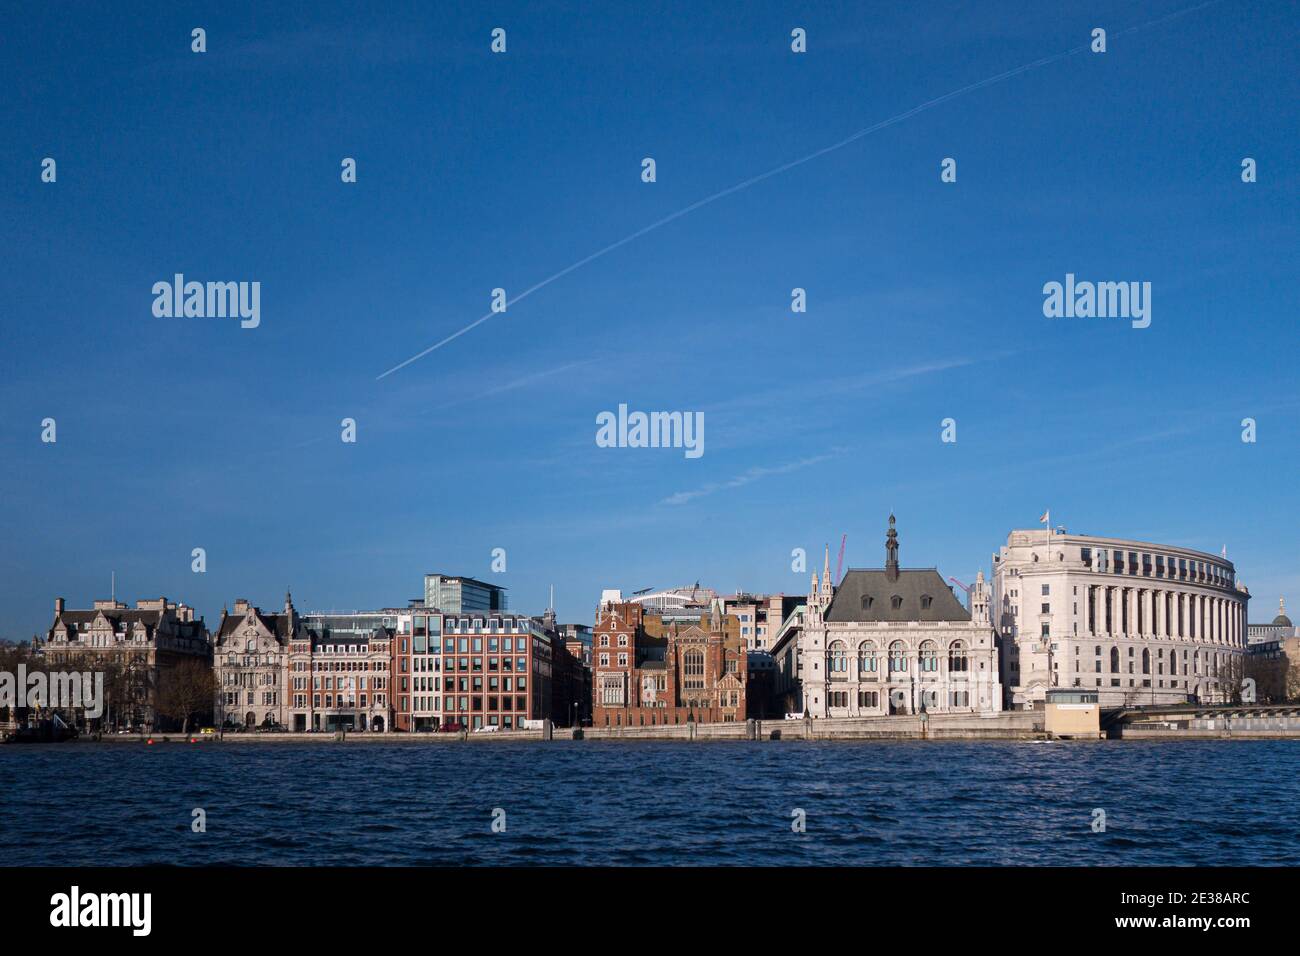 Cityscape view across River Thames of row of period architecture apartment and office buildings along Victoria Embankement in London United Kingdom Stock Photo